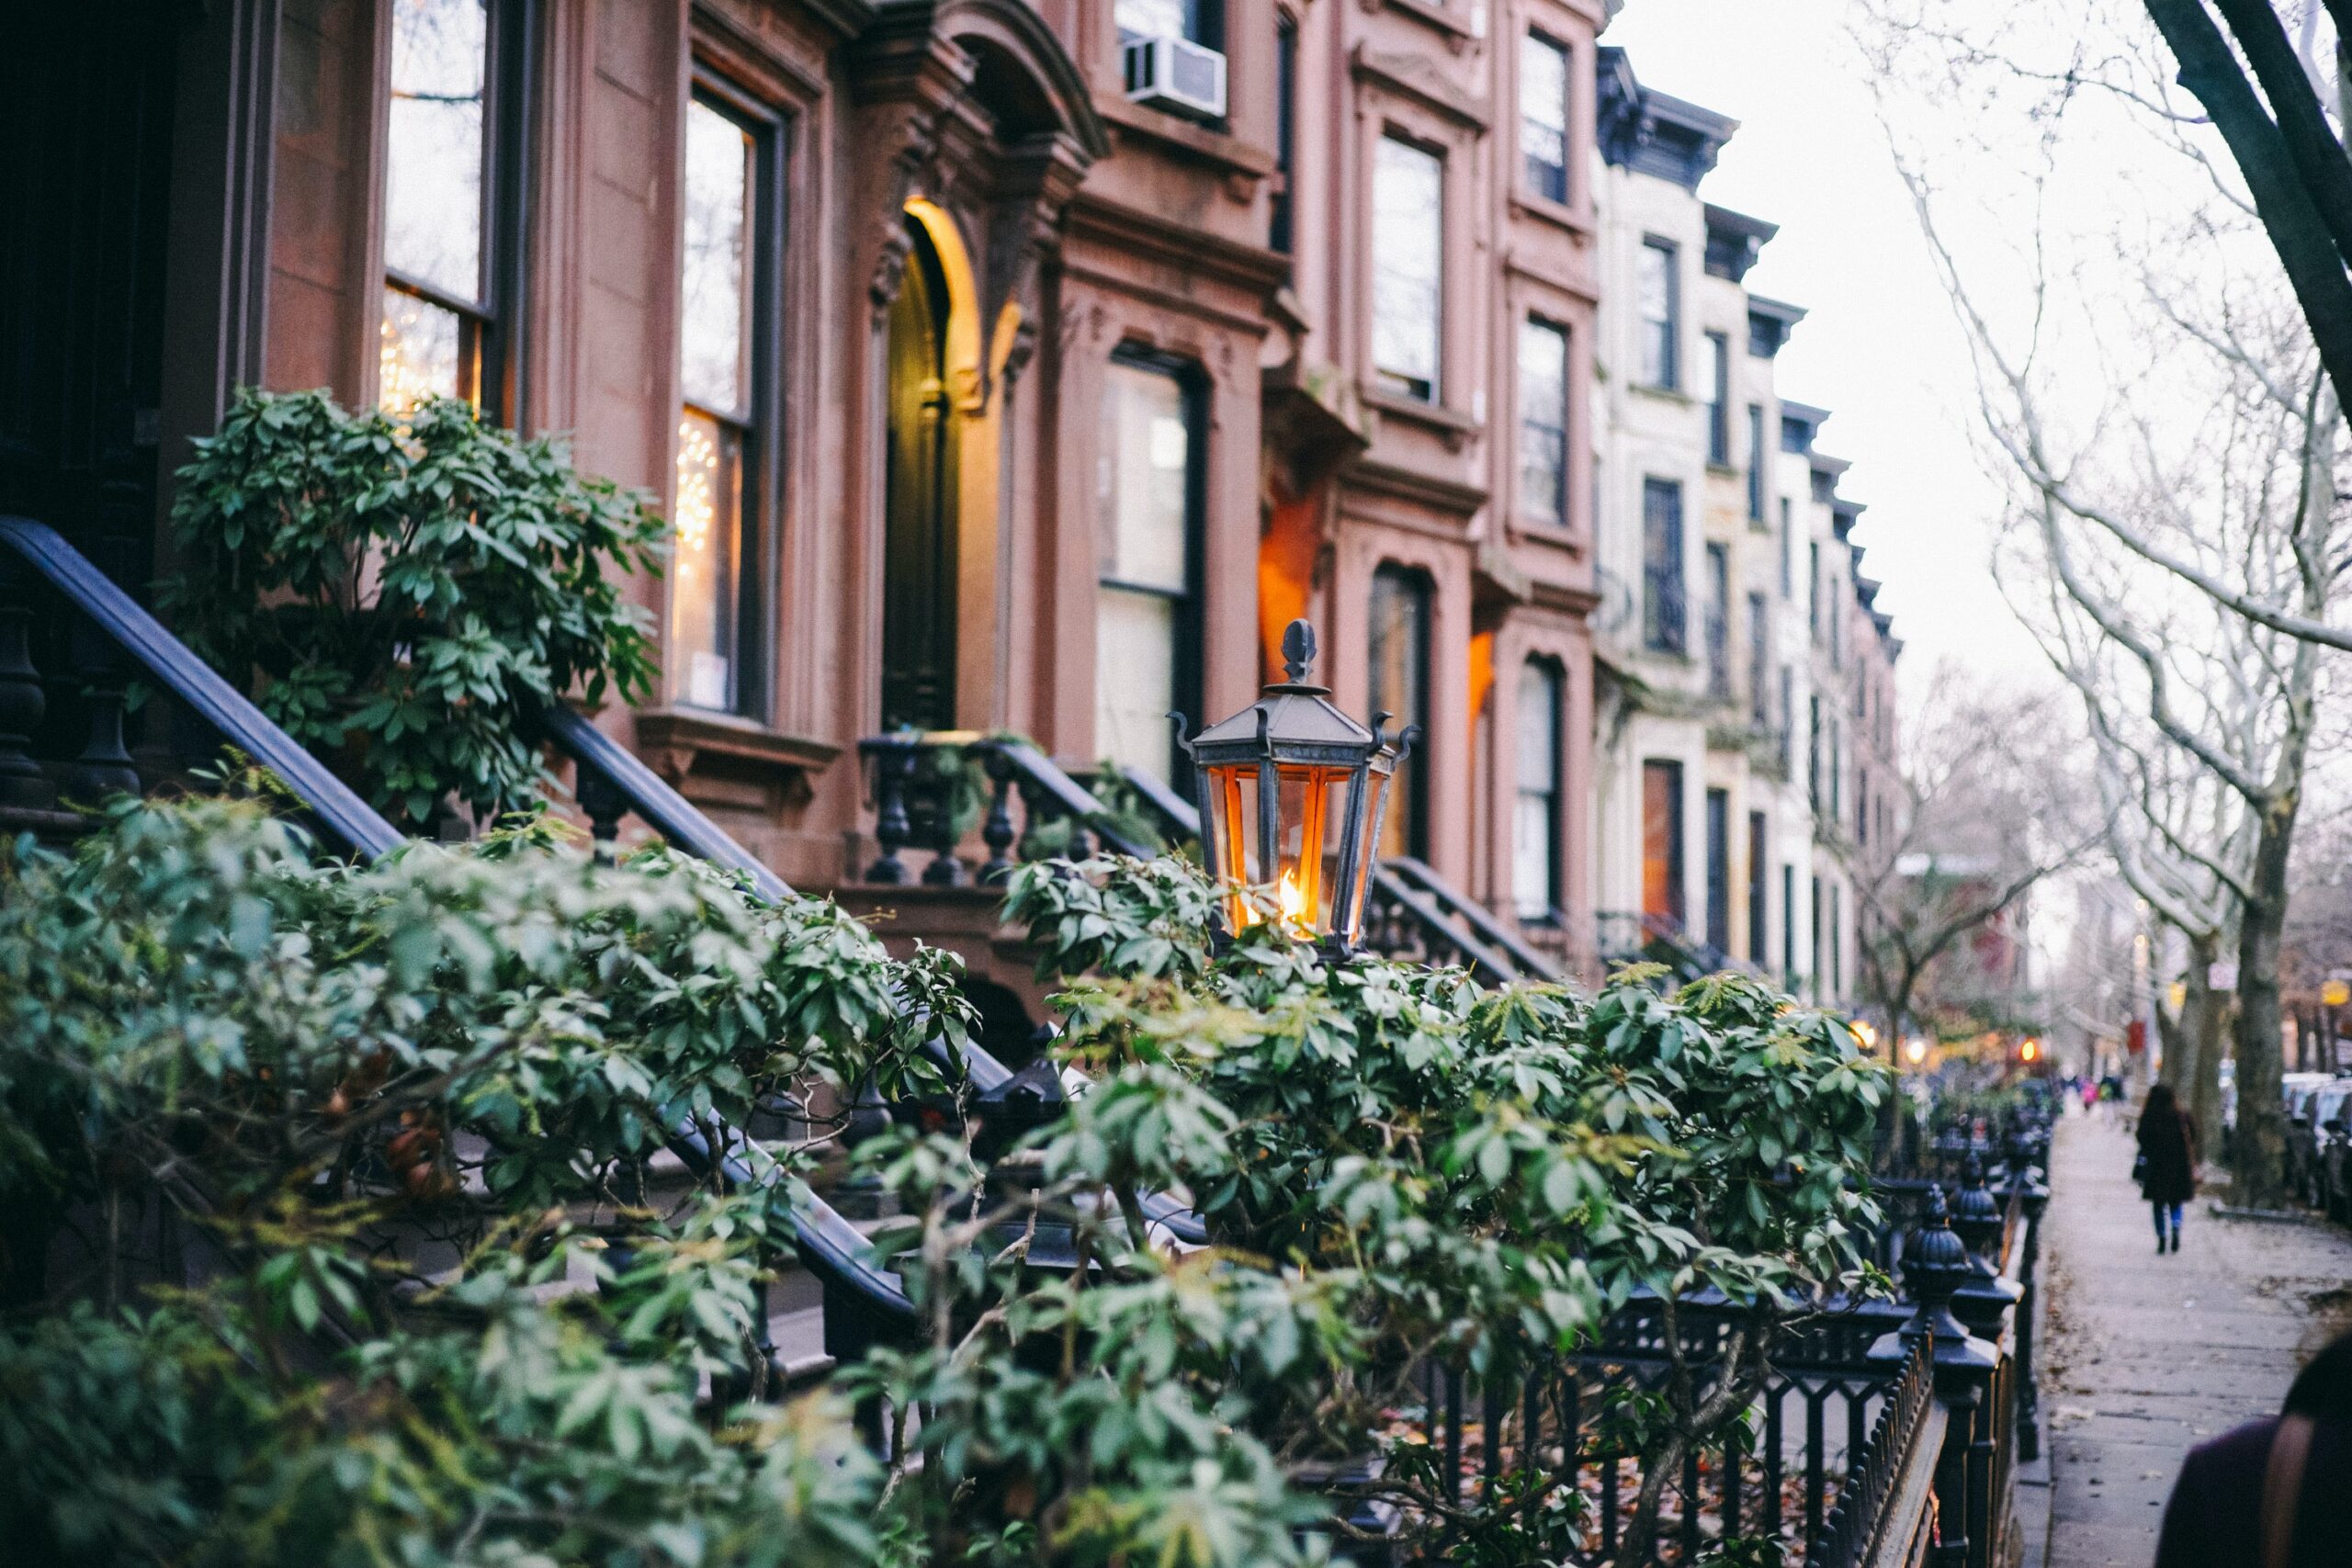 Homes in family-friendly Park Slone neighborhood in Brooklyn New York during winter time